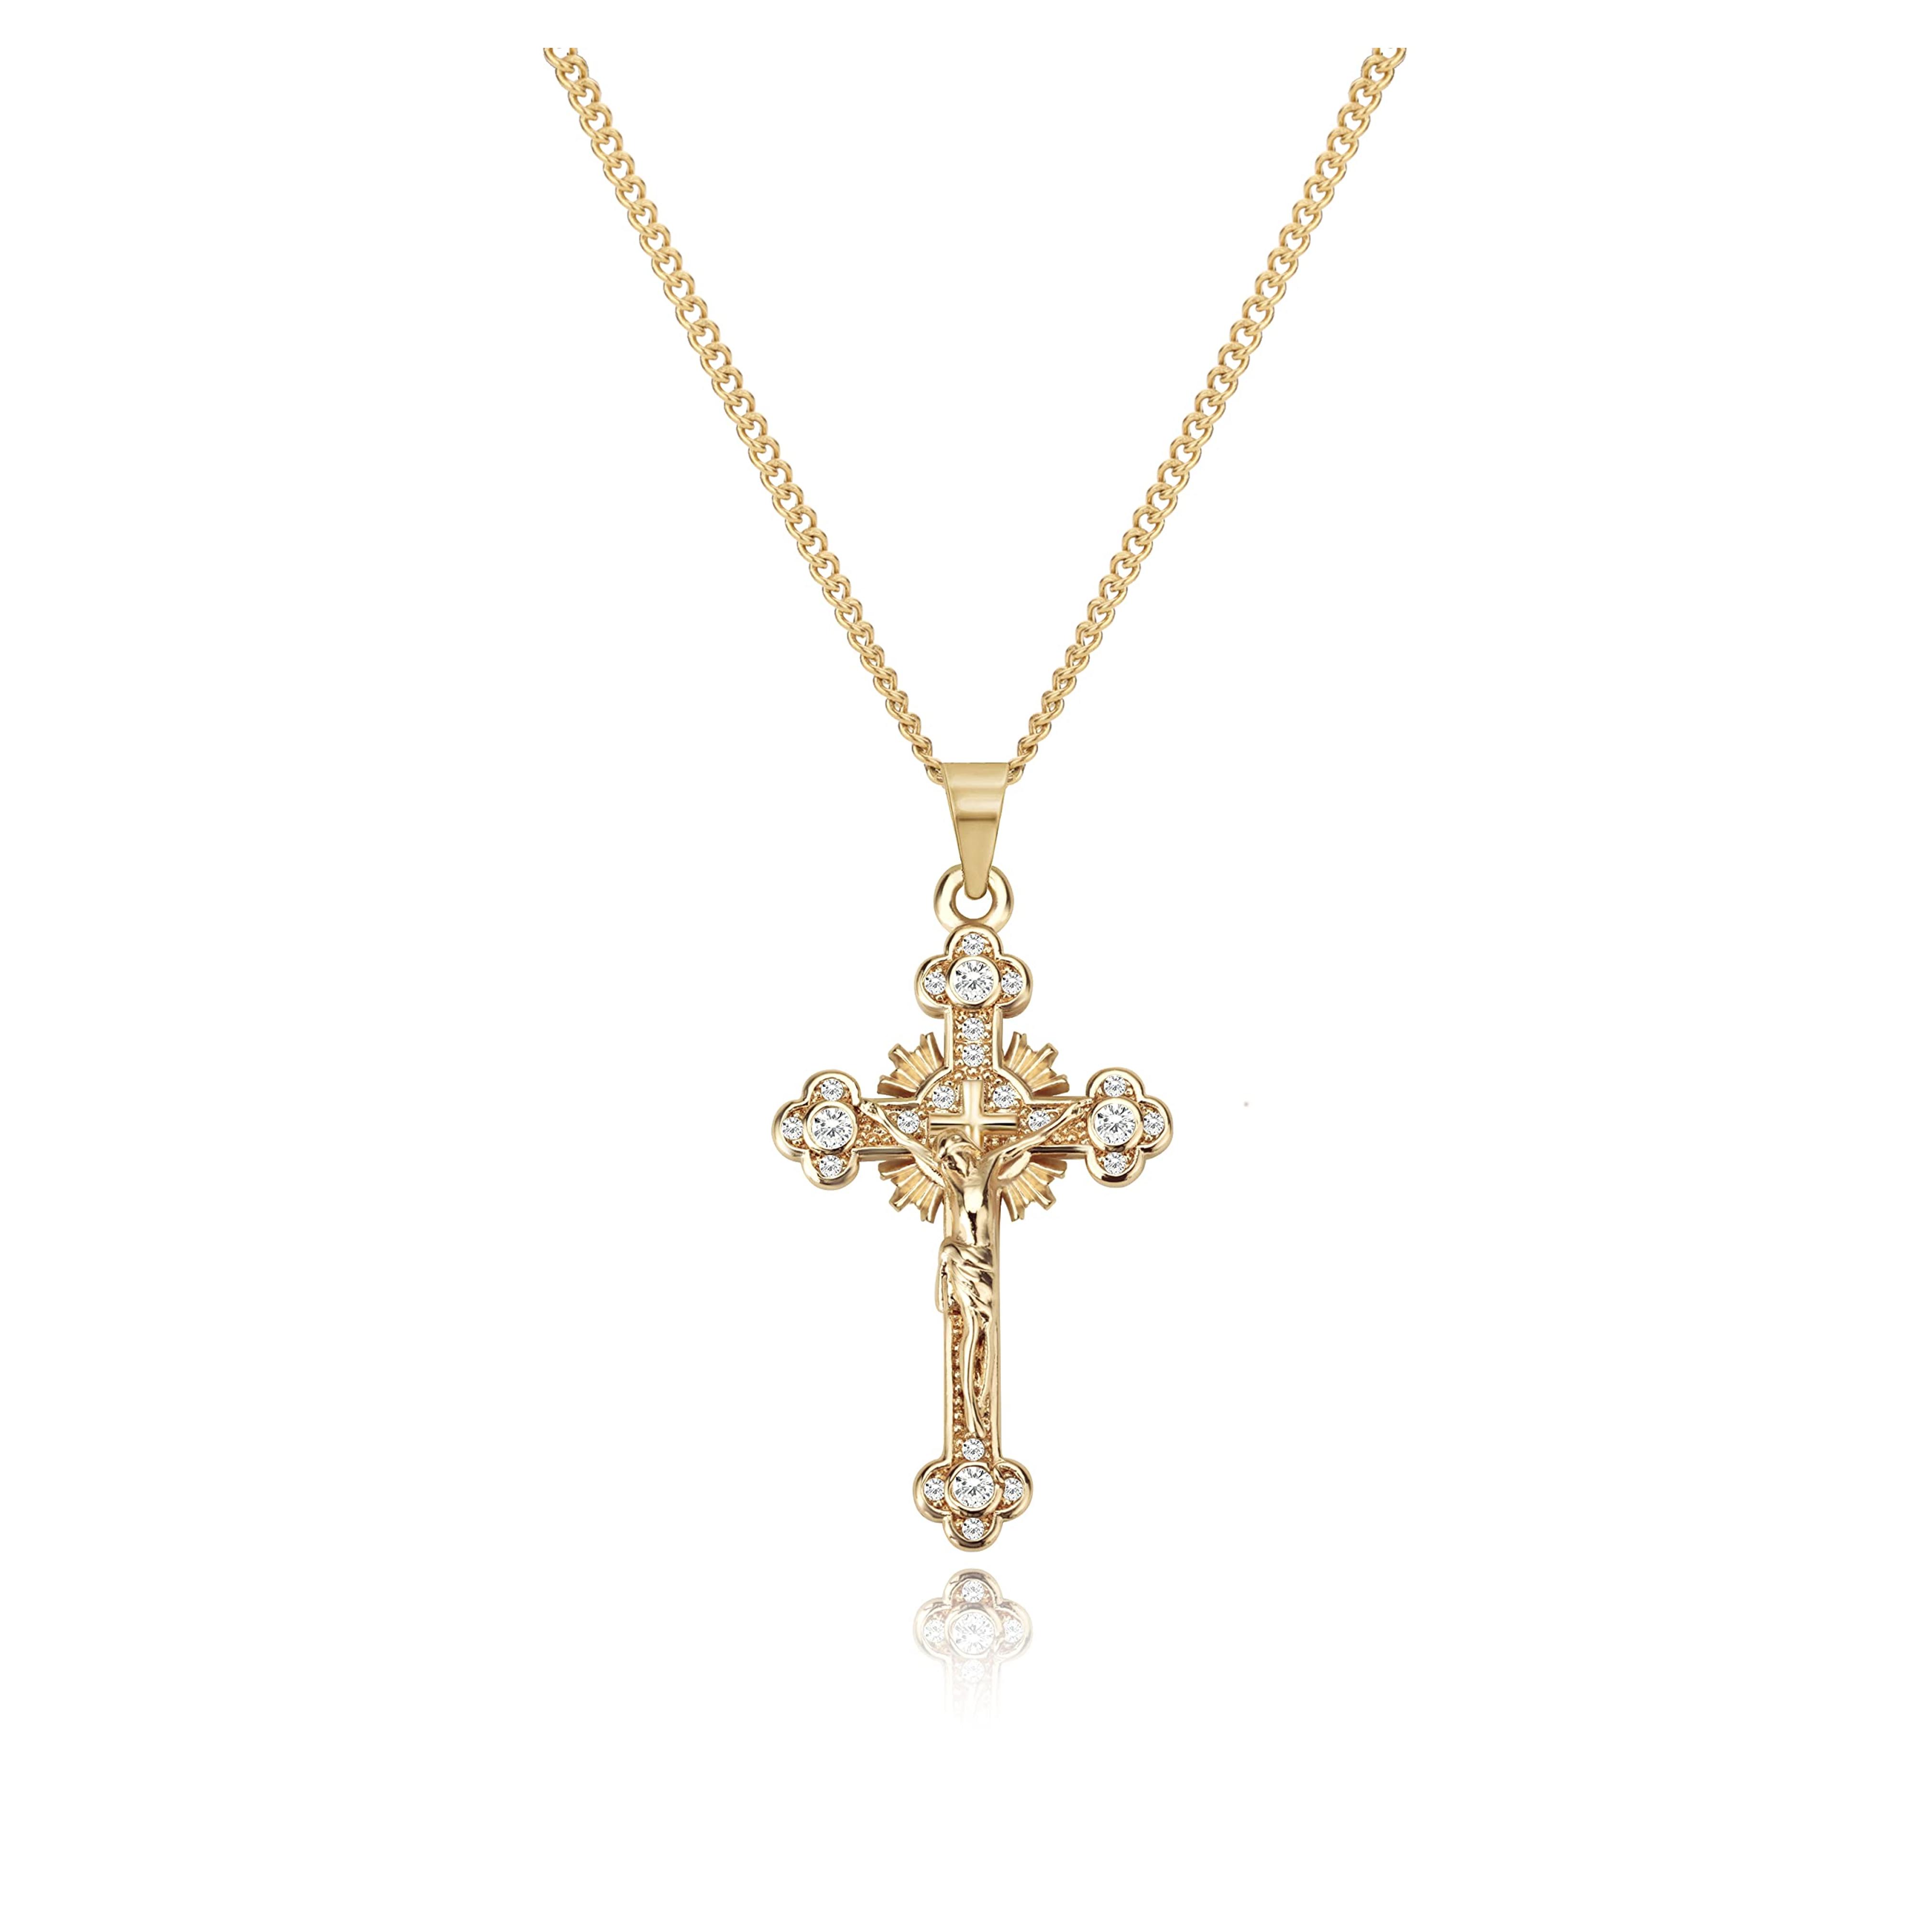 Amazon.com: VAttract Cross Necklace for Women 18K Gold Plated Cross Pendant Choker Necklace for teen girls : Clothing, Shoes & Jewelry